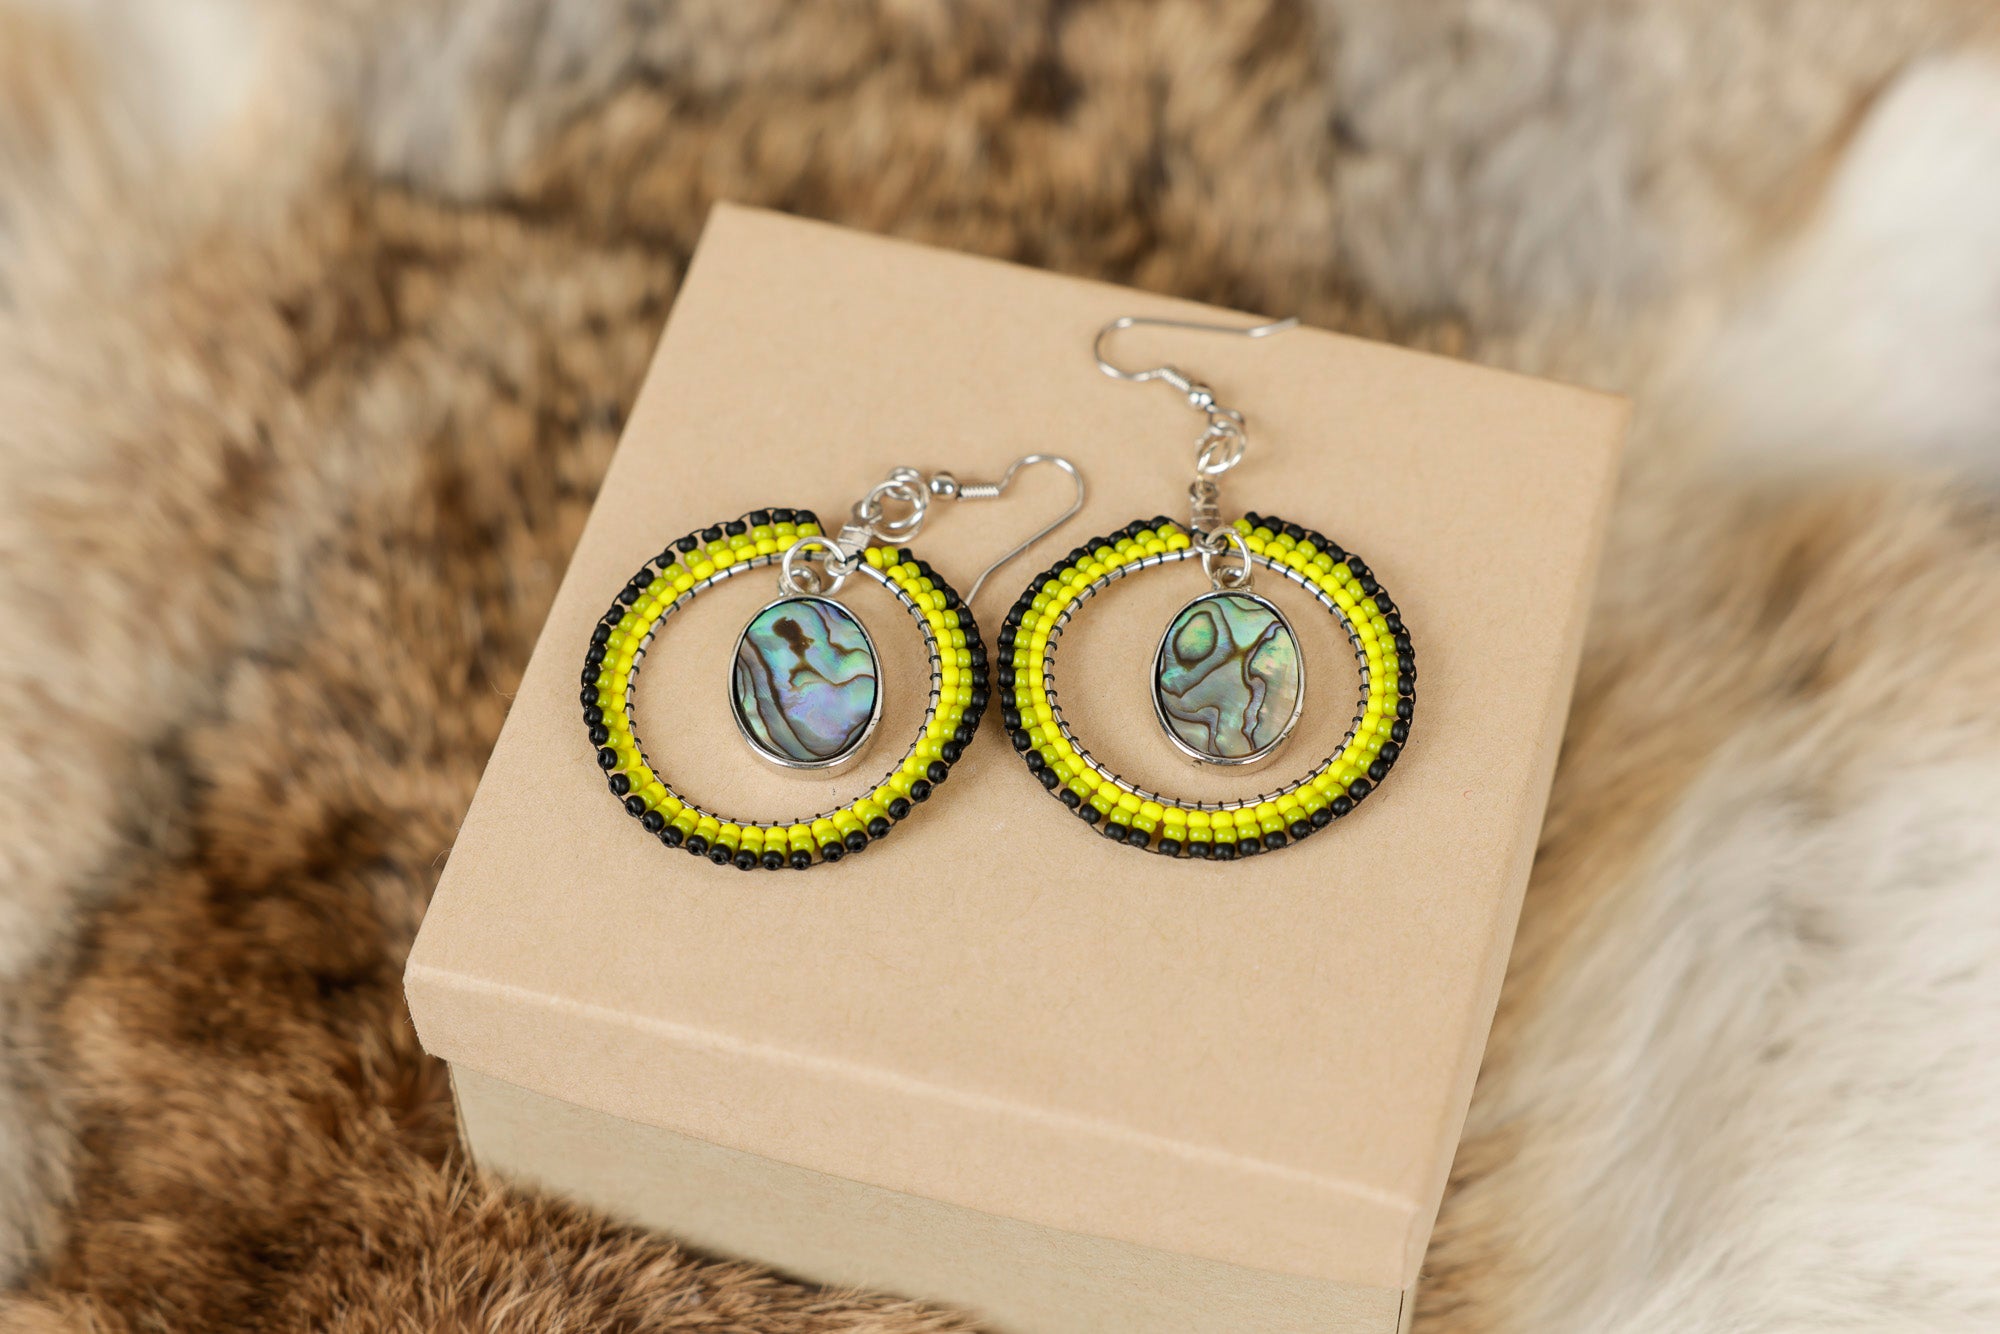 Round Beaded Earrings With Abalone Shells